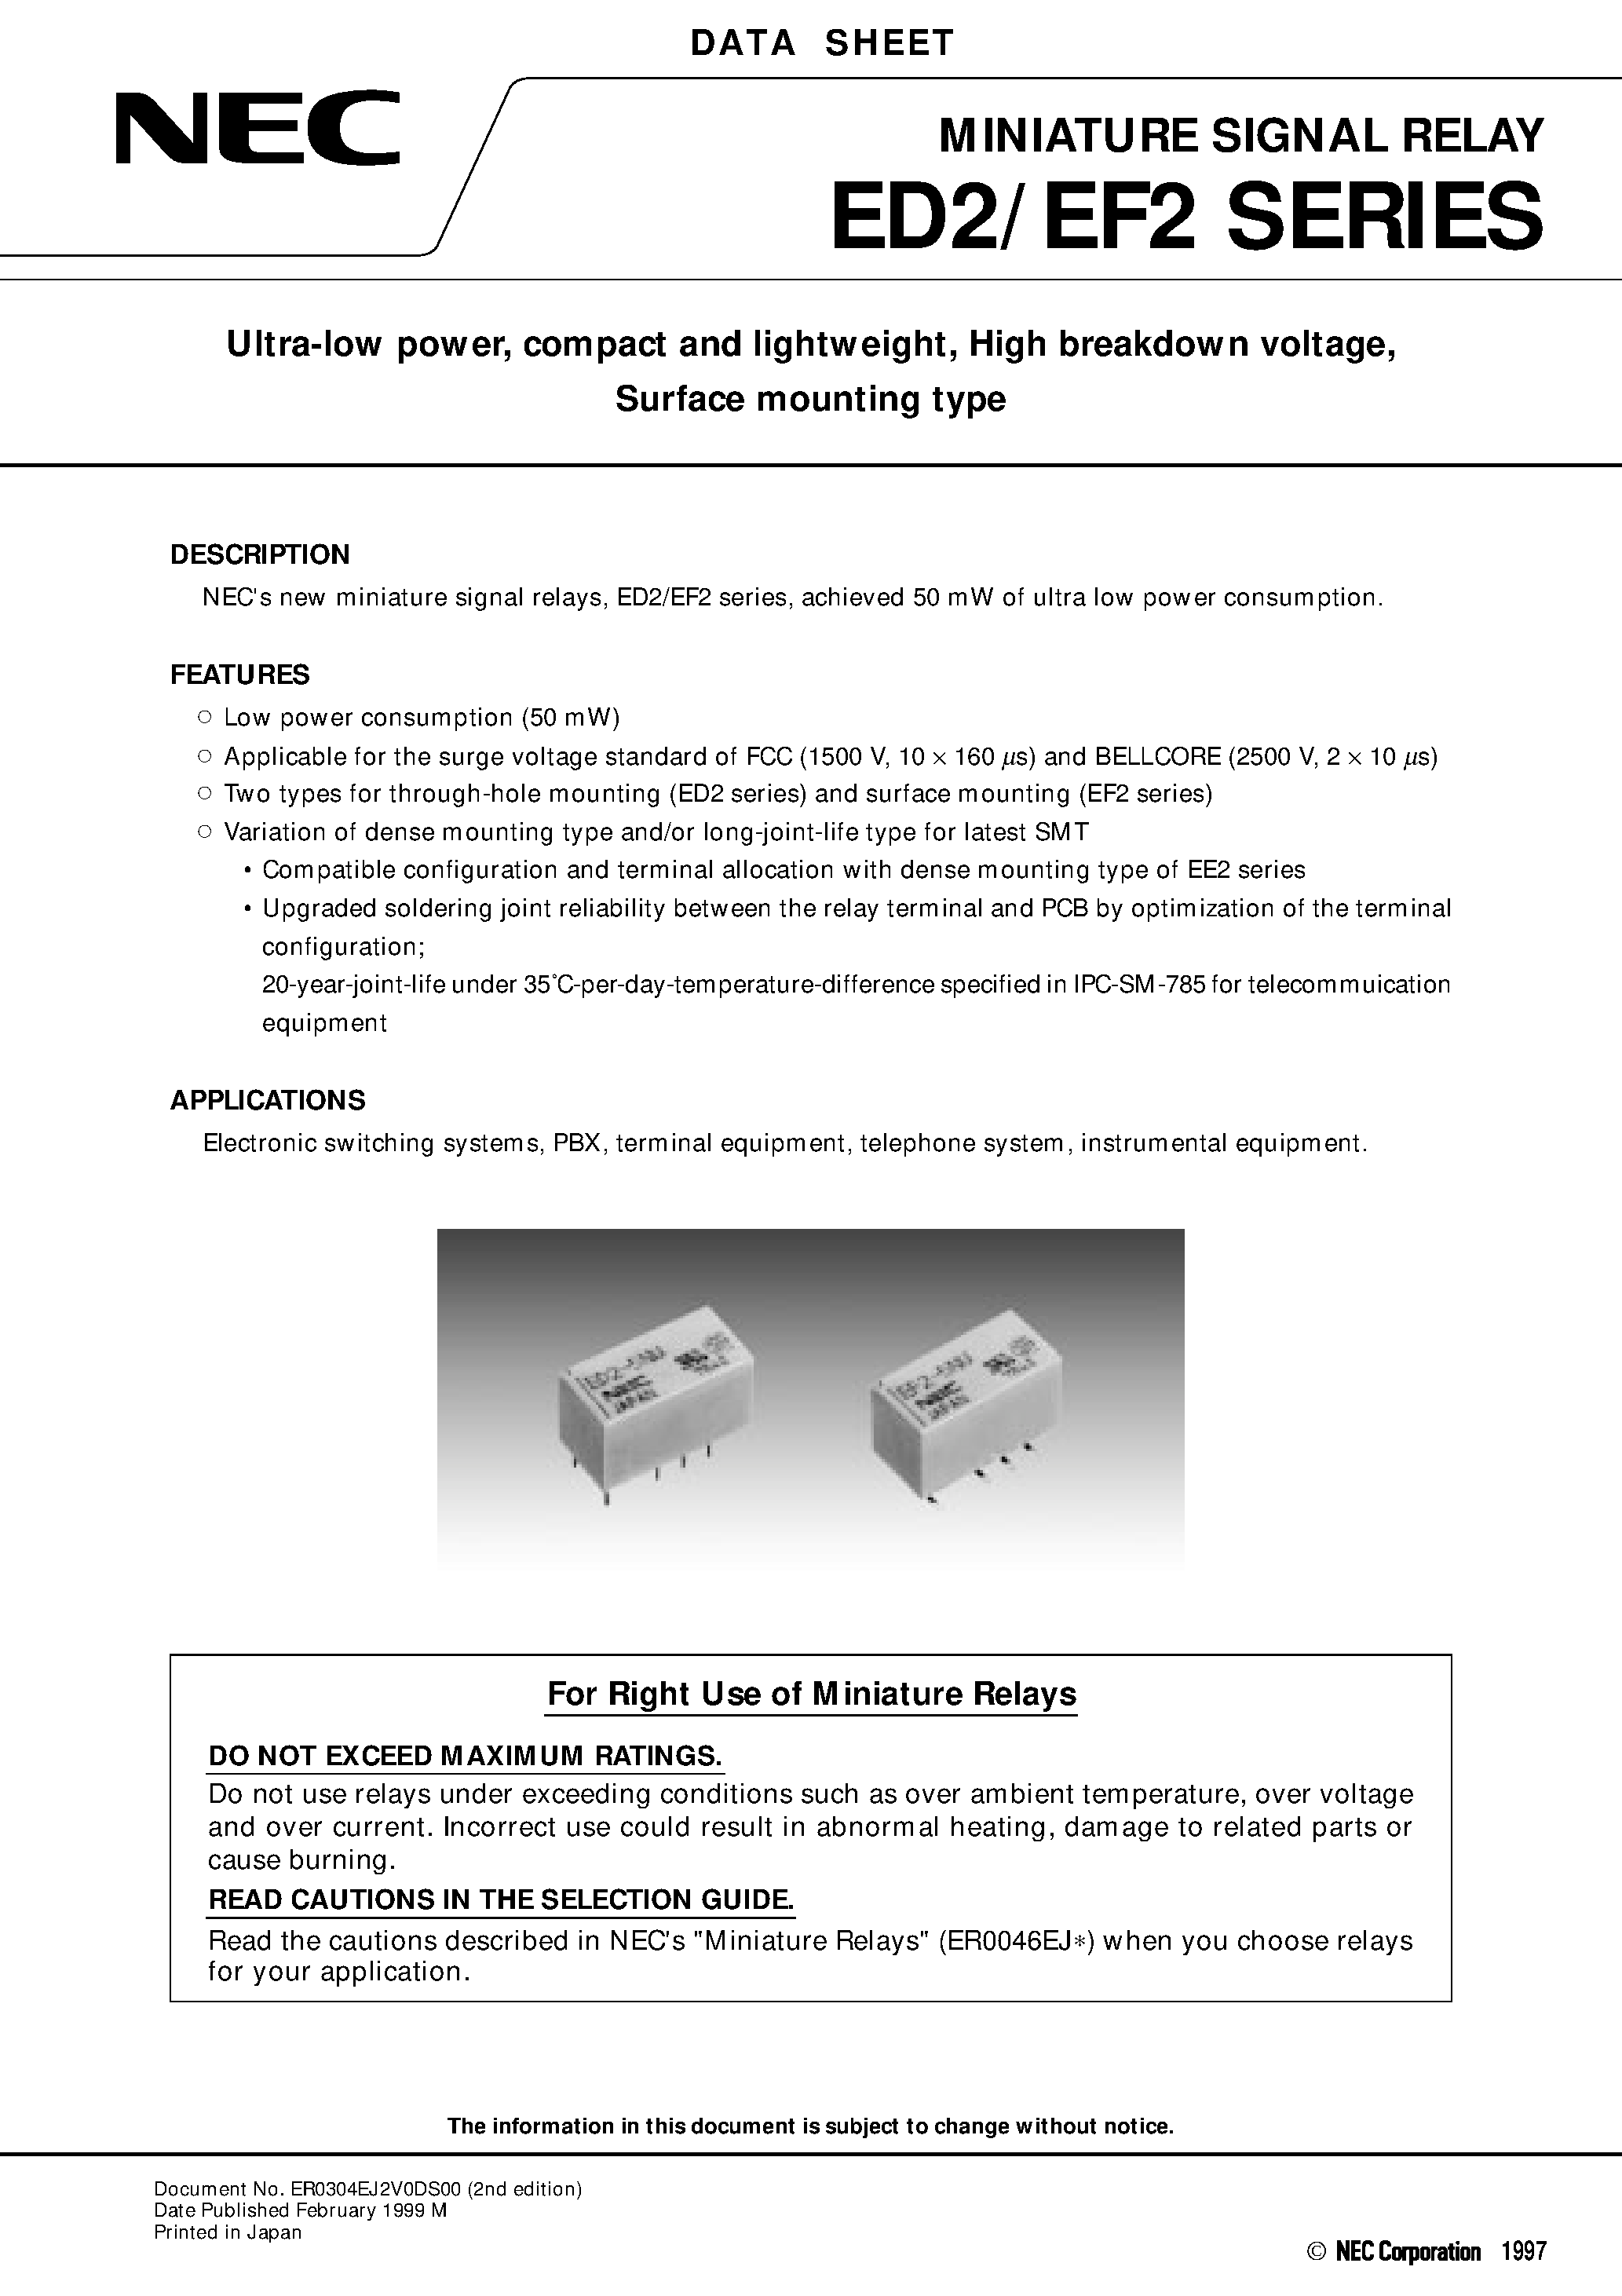 Datasheet EF2-9 - Ultra-low power/ compact and lightweight/ High breakdown voltage/ Surface mounting type page 1